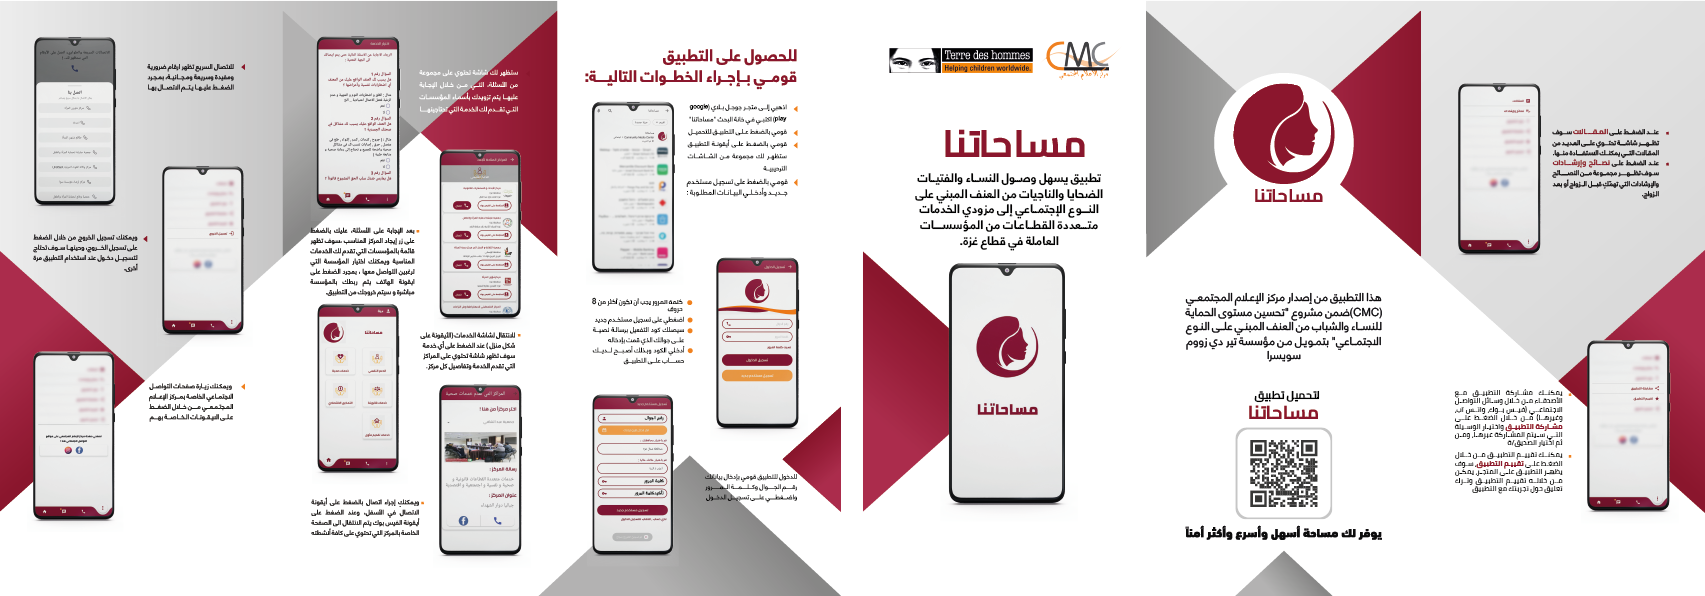 graphics showing the mobile application and its features in Arabic